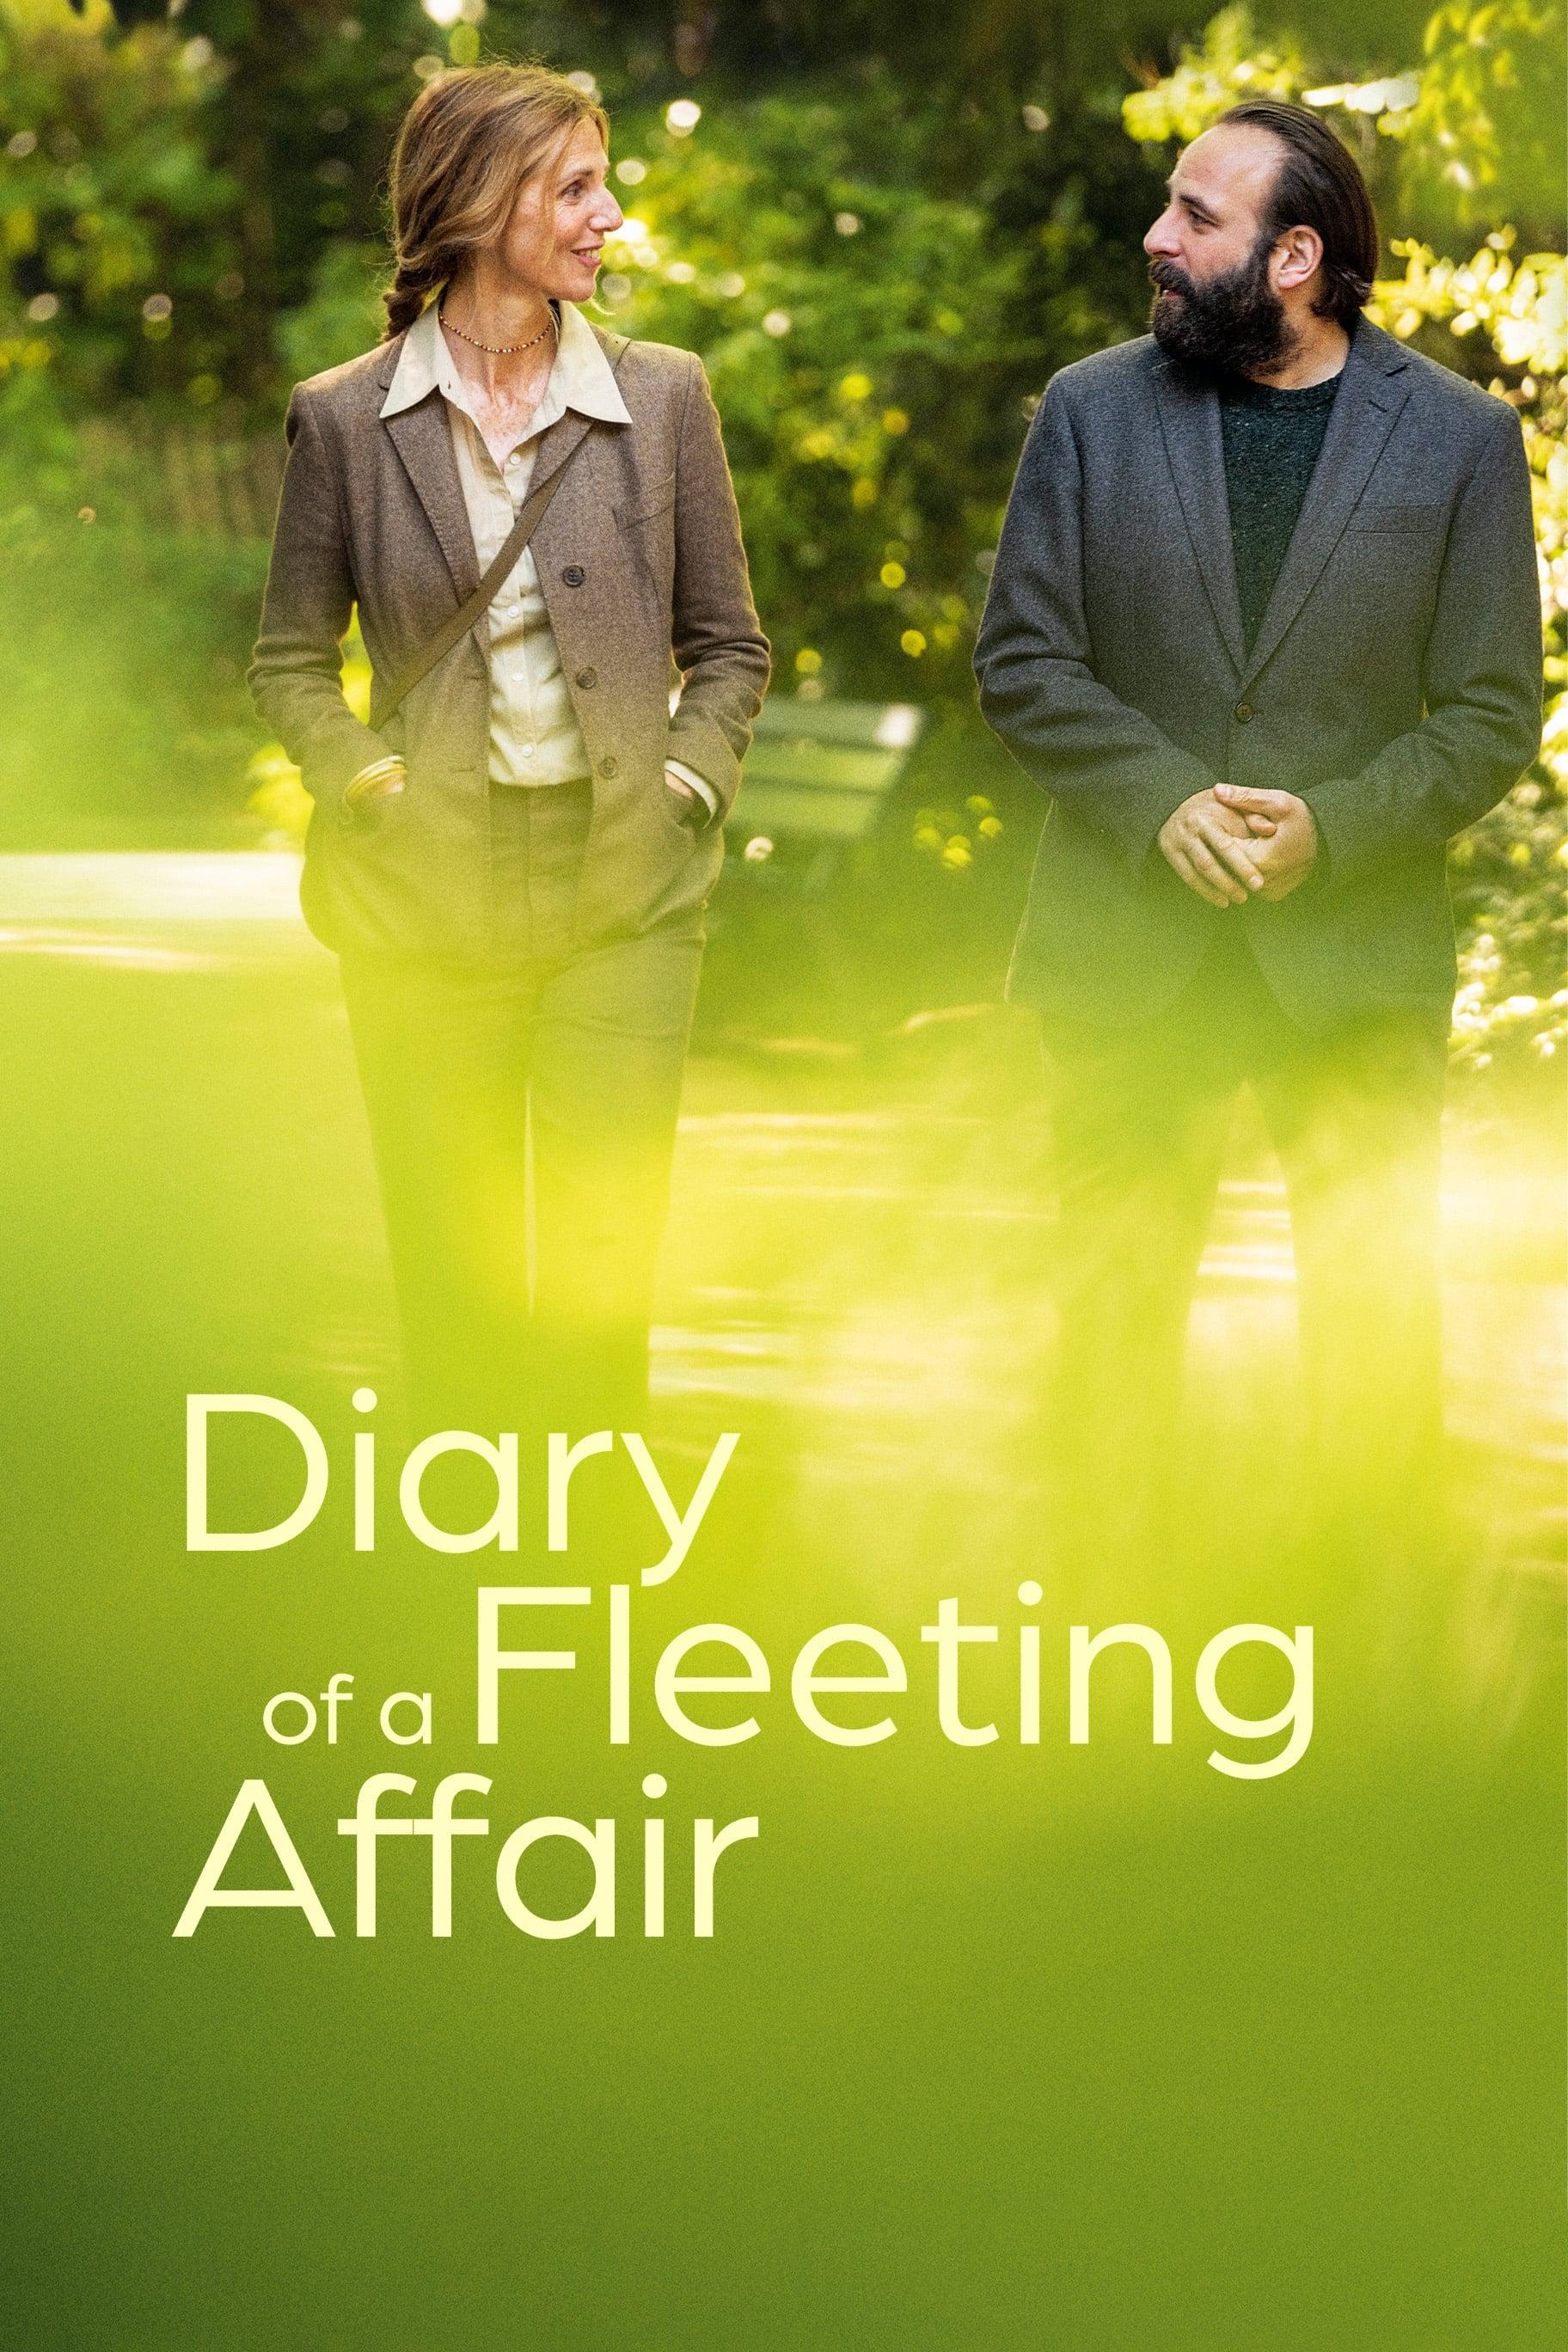 Diary of a Fleeting Affair poster